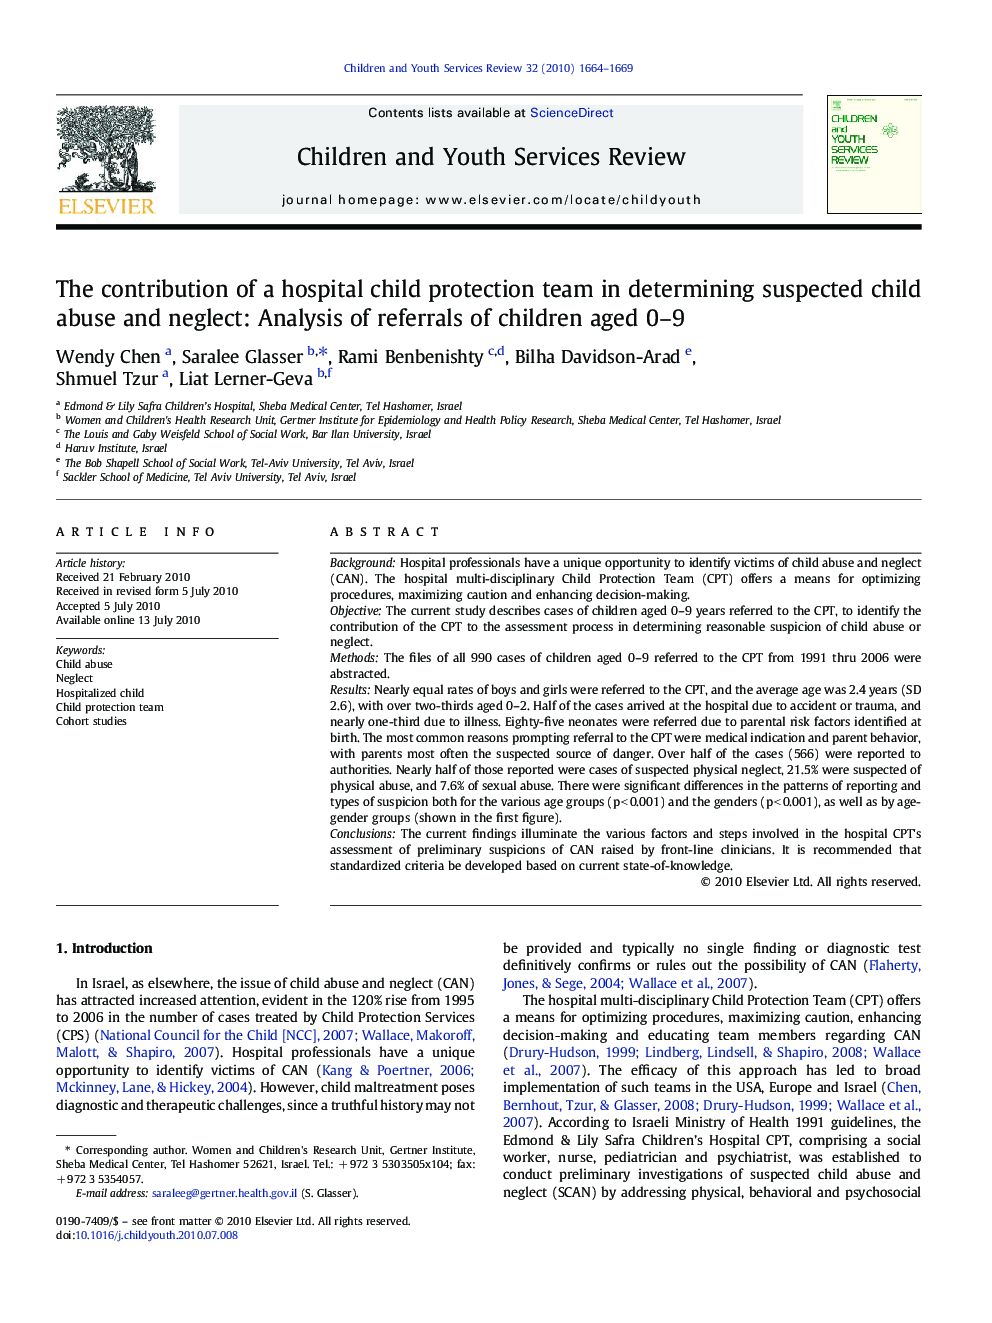 The contribution of a hospital child protection team in determining suspected child abuse and neglect: Analysis of referrals of children aged 0–9